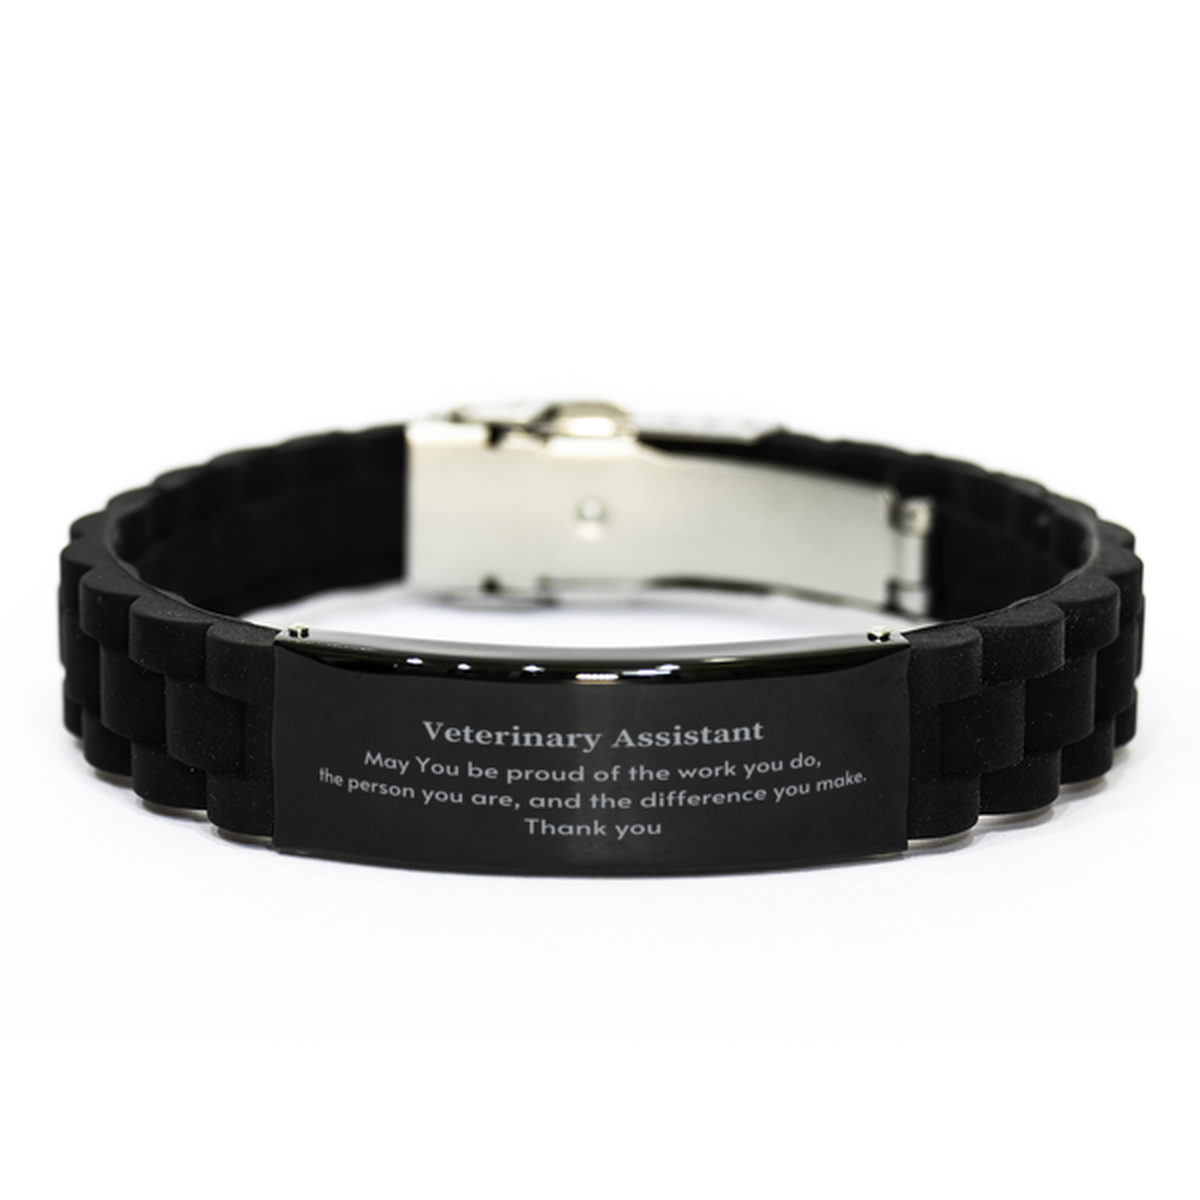 Heartwarming Black Glidelock Clasp Bracelet Retirement Coworkers Gifts for Veterinary Assistant, Veterinary Assistant May You be proud of the work you do, the person you are Gifts for Boss Men Women Friends